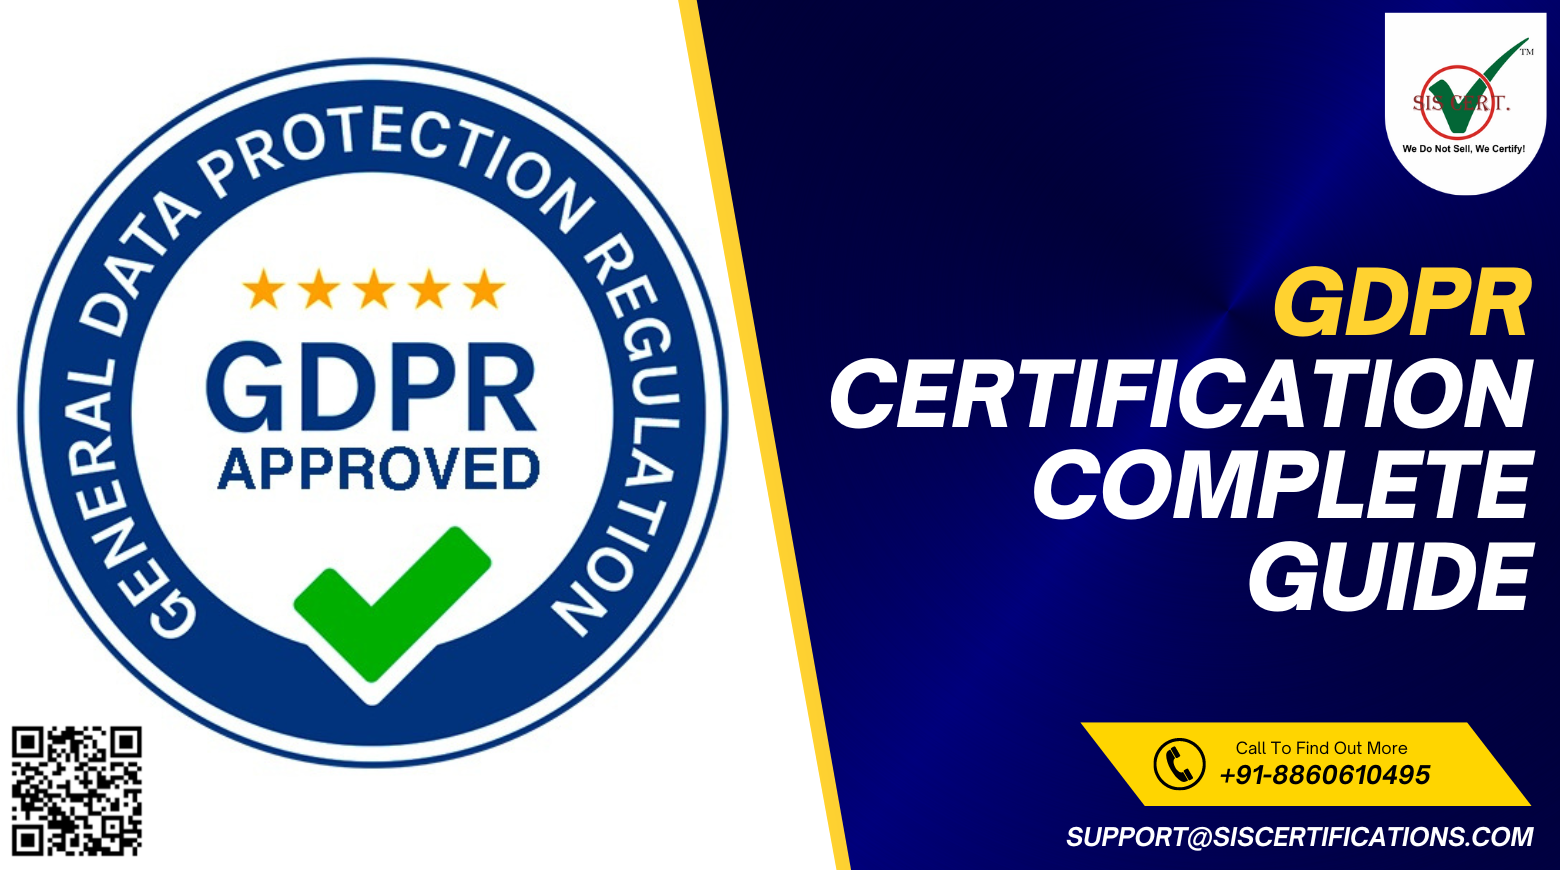 GDPR Certification Complete Guide